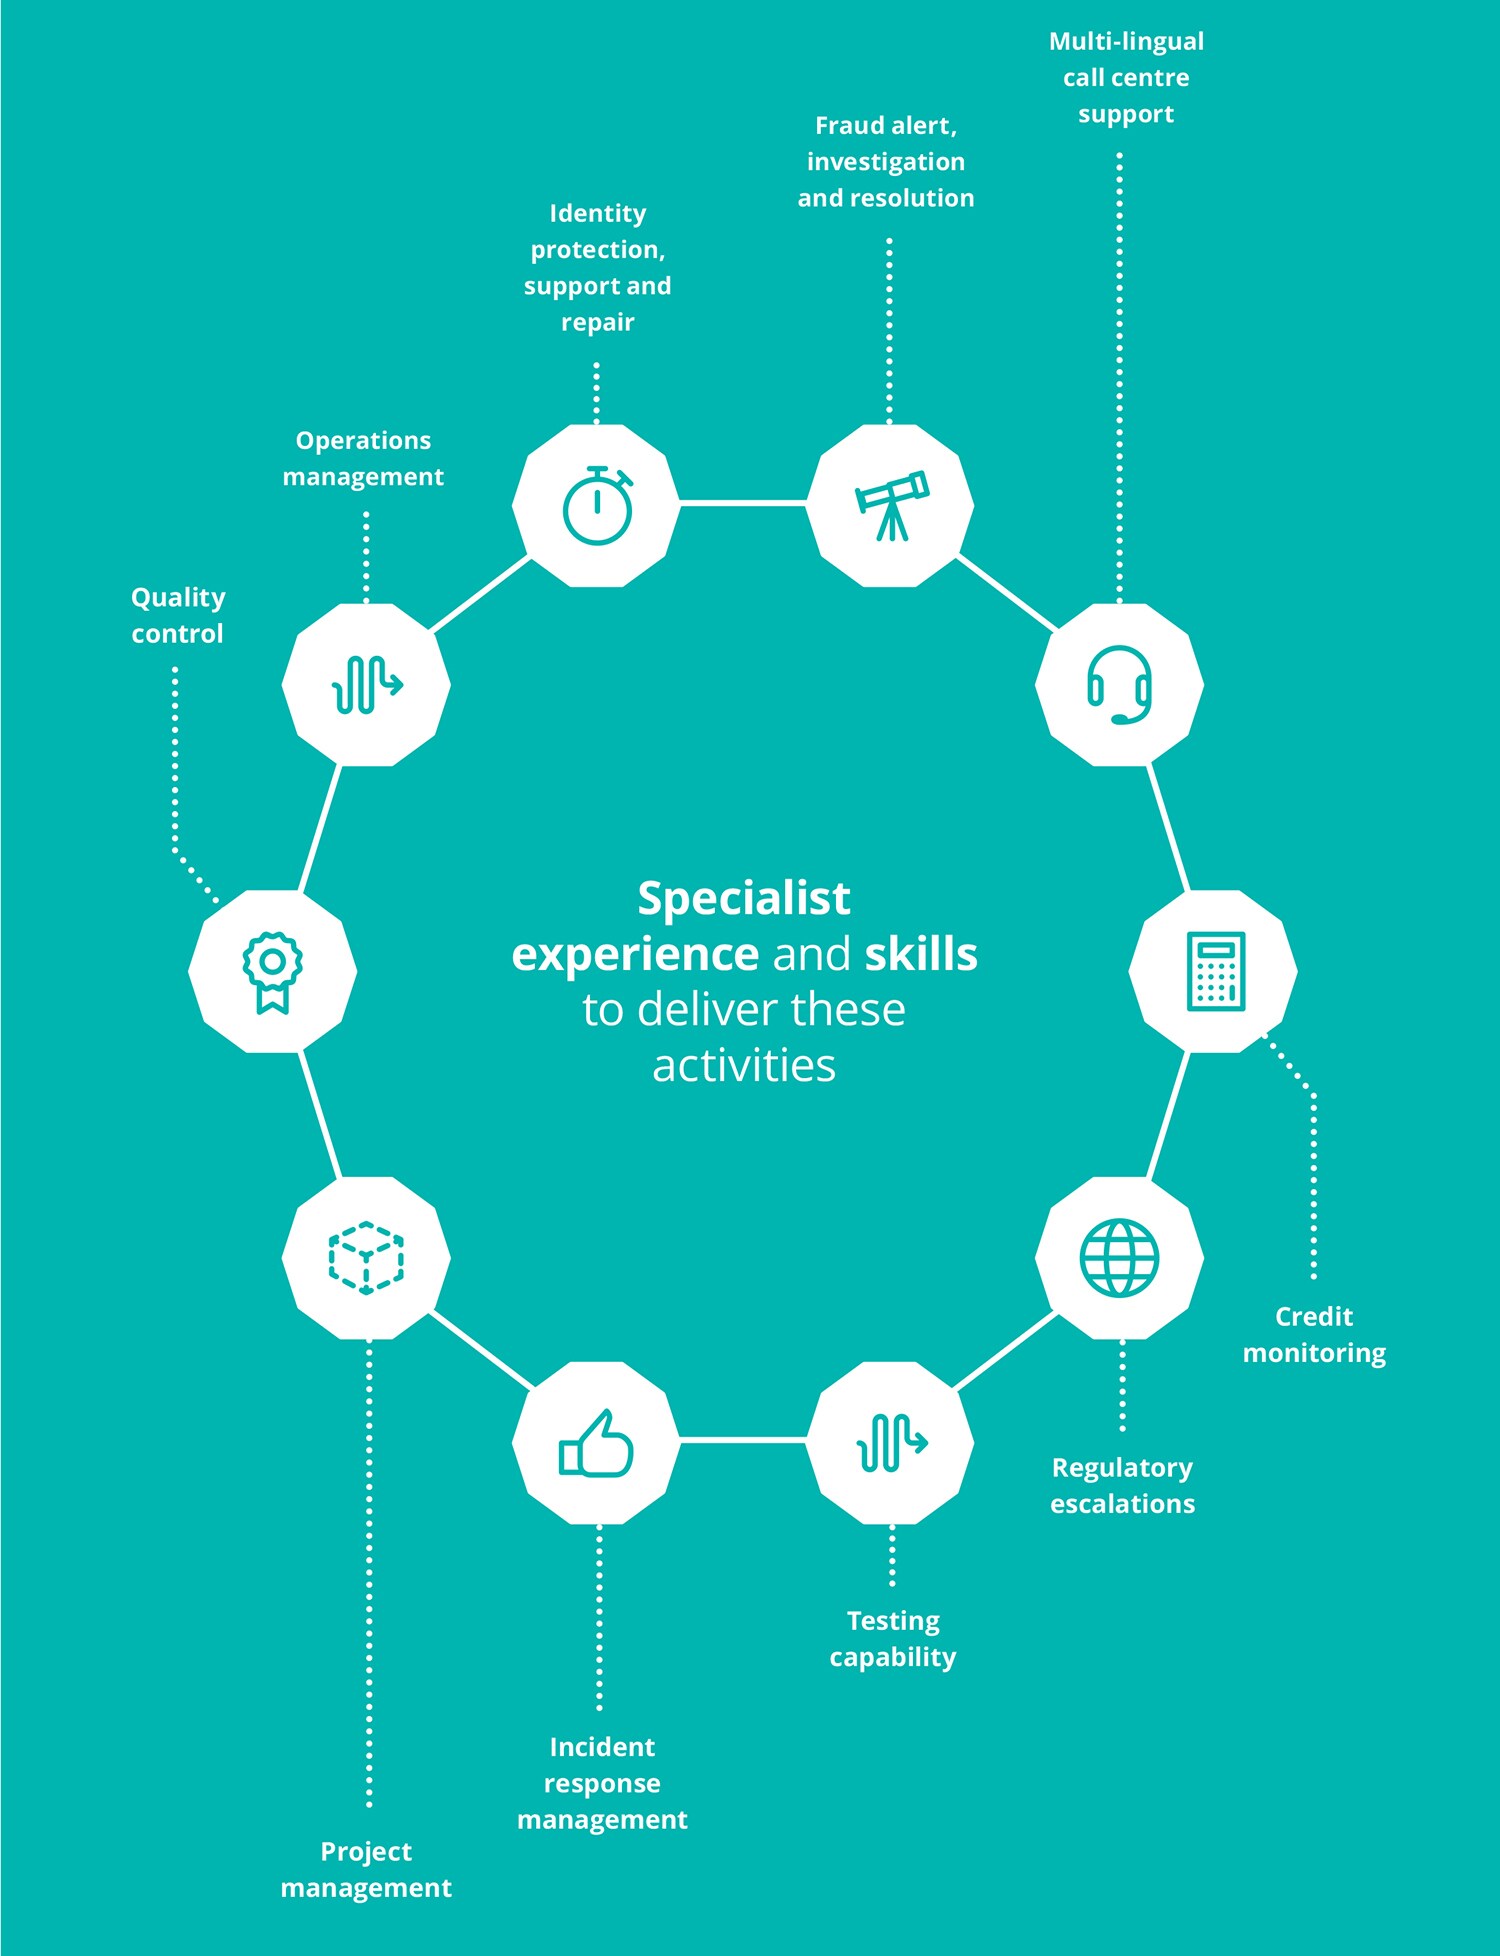 deloitte-uk-specialist-experience-and-skills.jpg